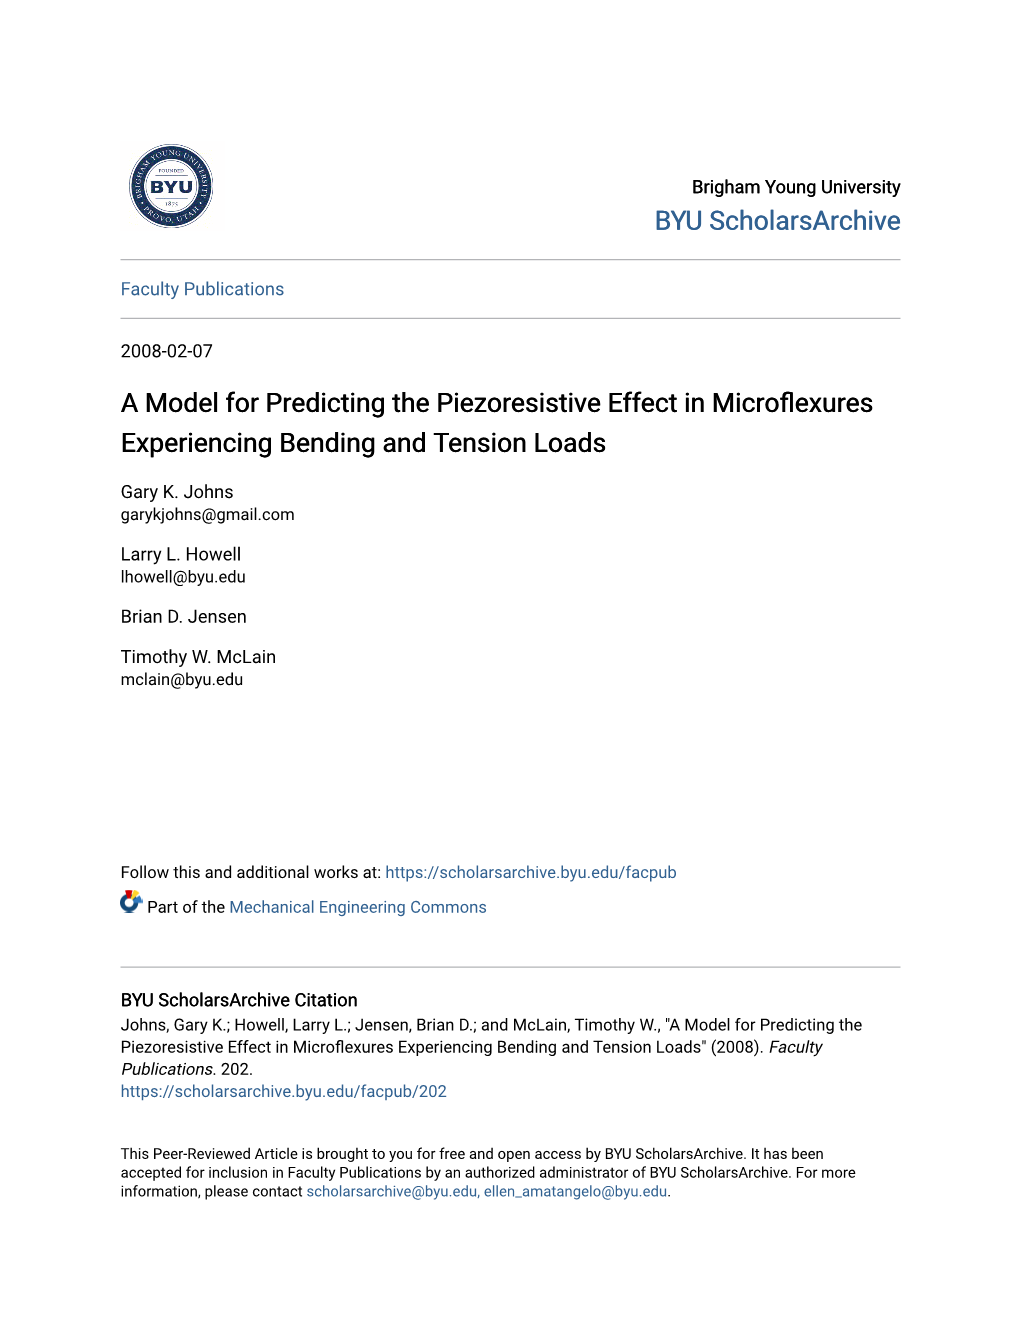 A Model for Predicting the Piezoresistive Effect in Microflexures Experiencing Bending and Tension Loads